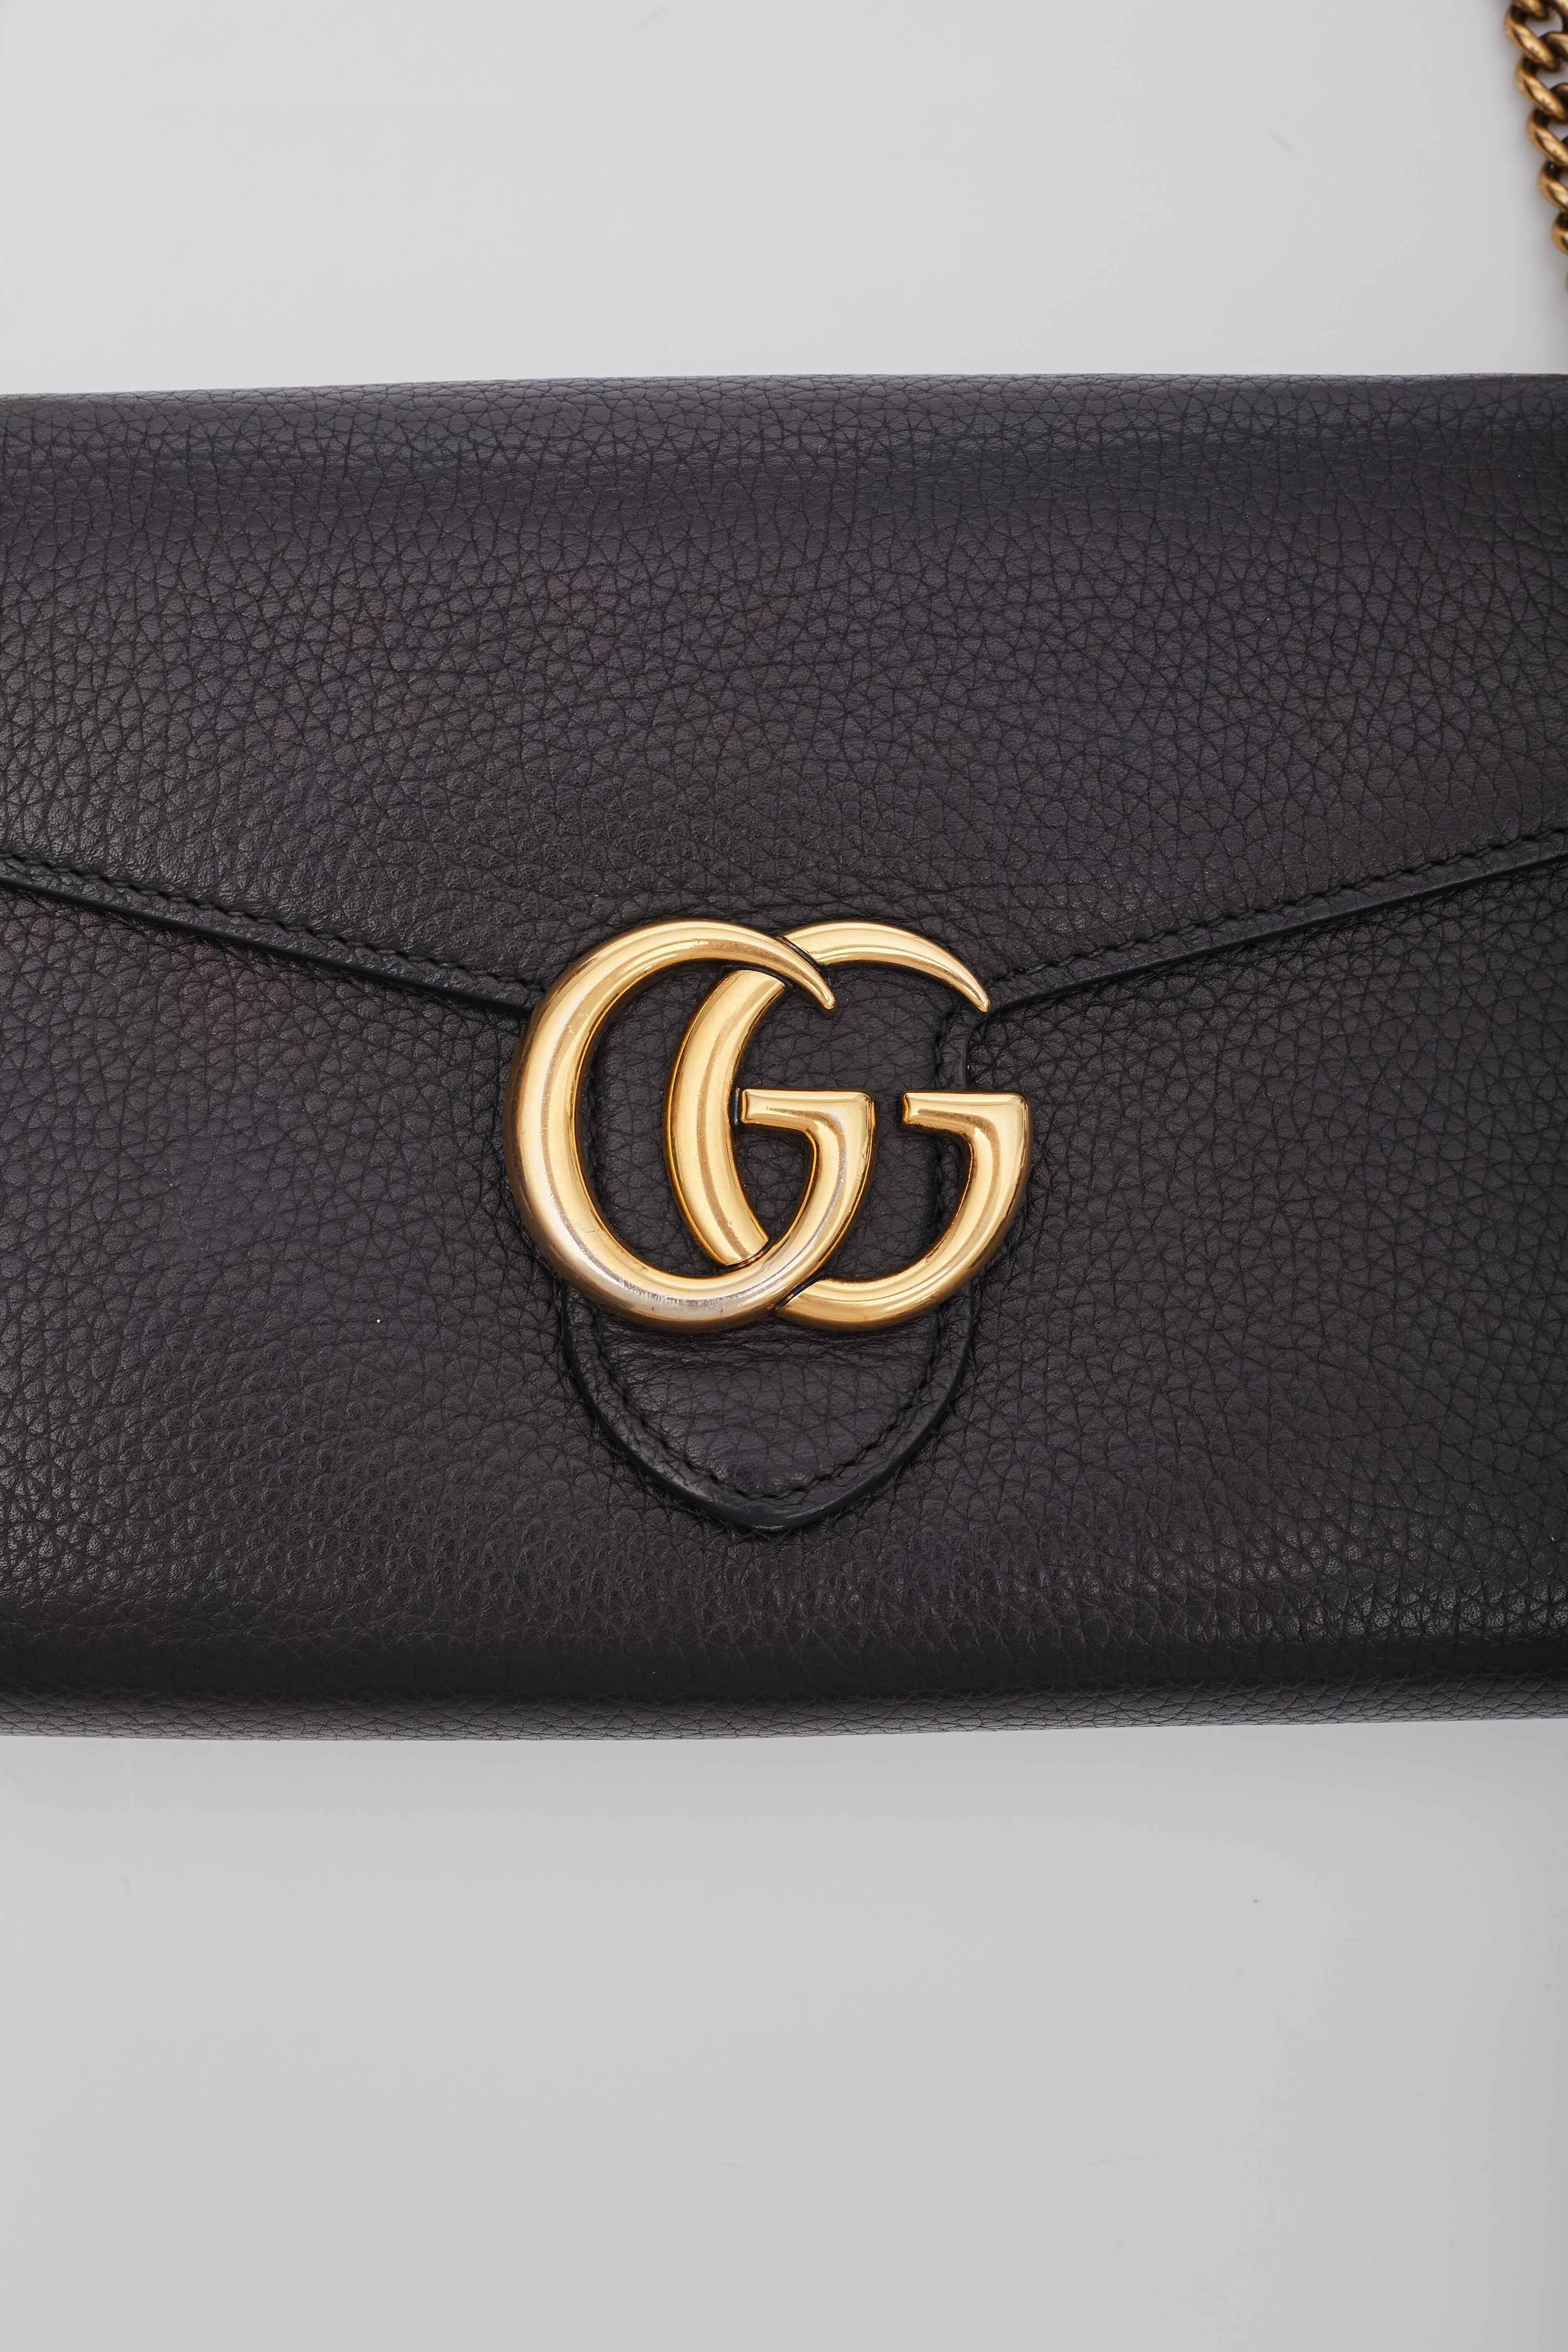 Gucci Calfskin GG Marmont Chain Wallet Black (Pre Loved) For Sale 2